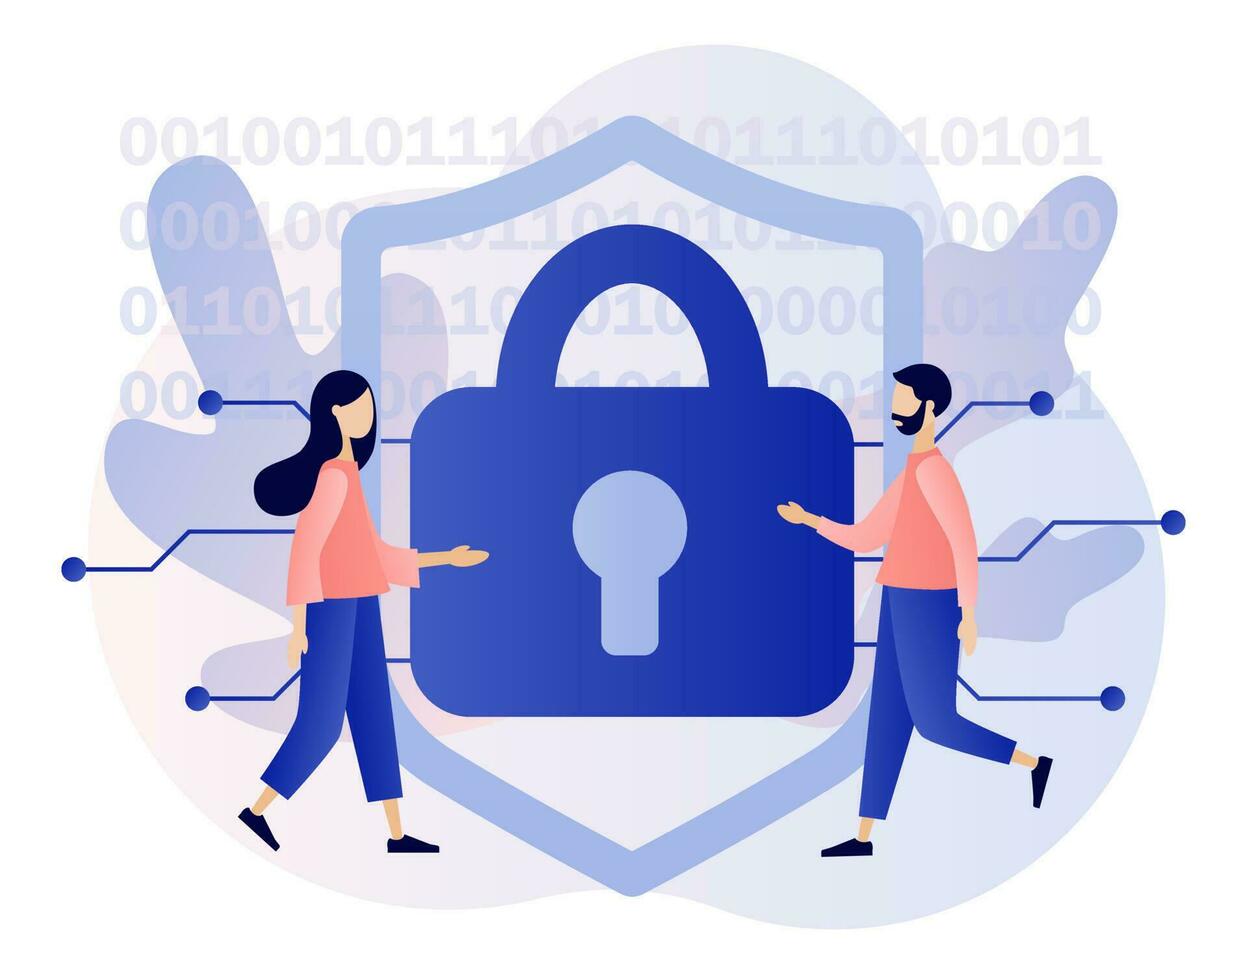 Cyber security. Tiny people protection of computer services and electronic information. Global network security. Data protection. Digital access and online safety. Modern flat cartoon style. Vector